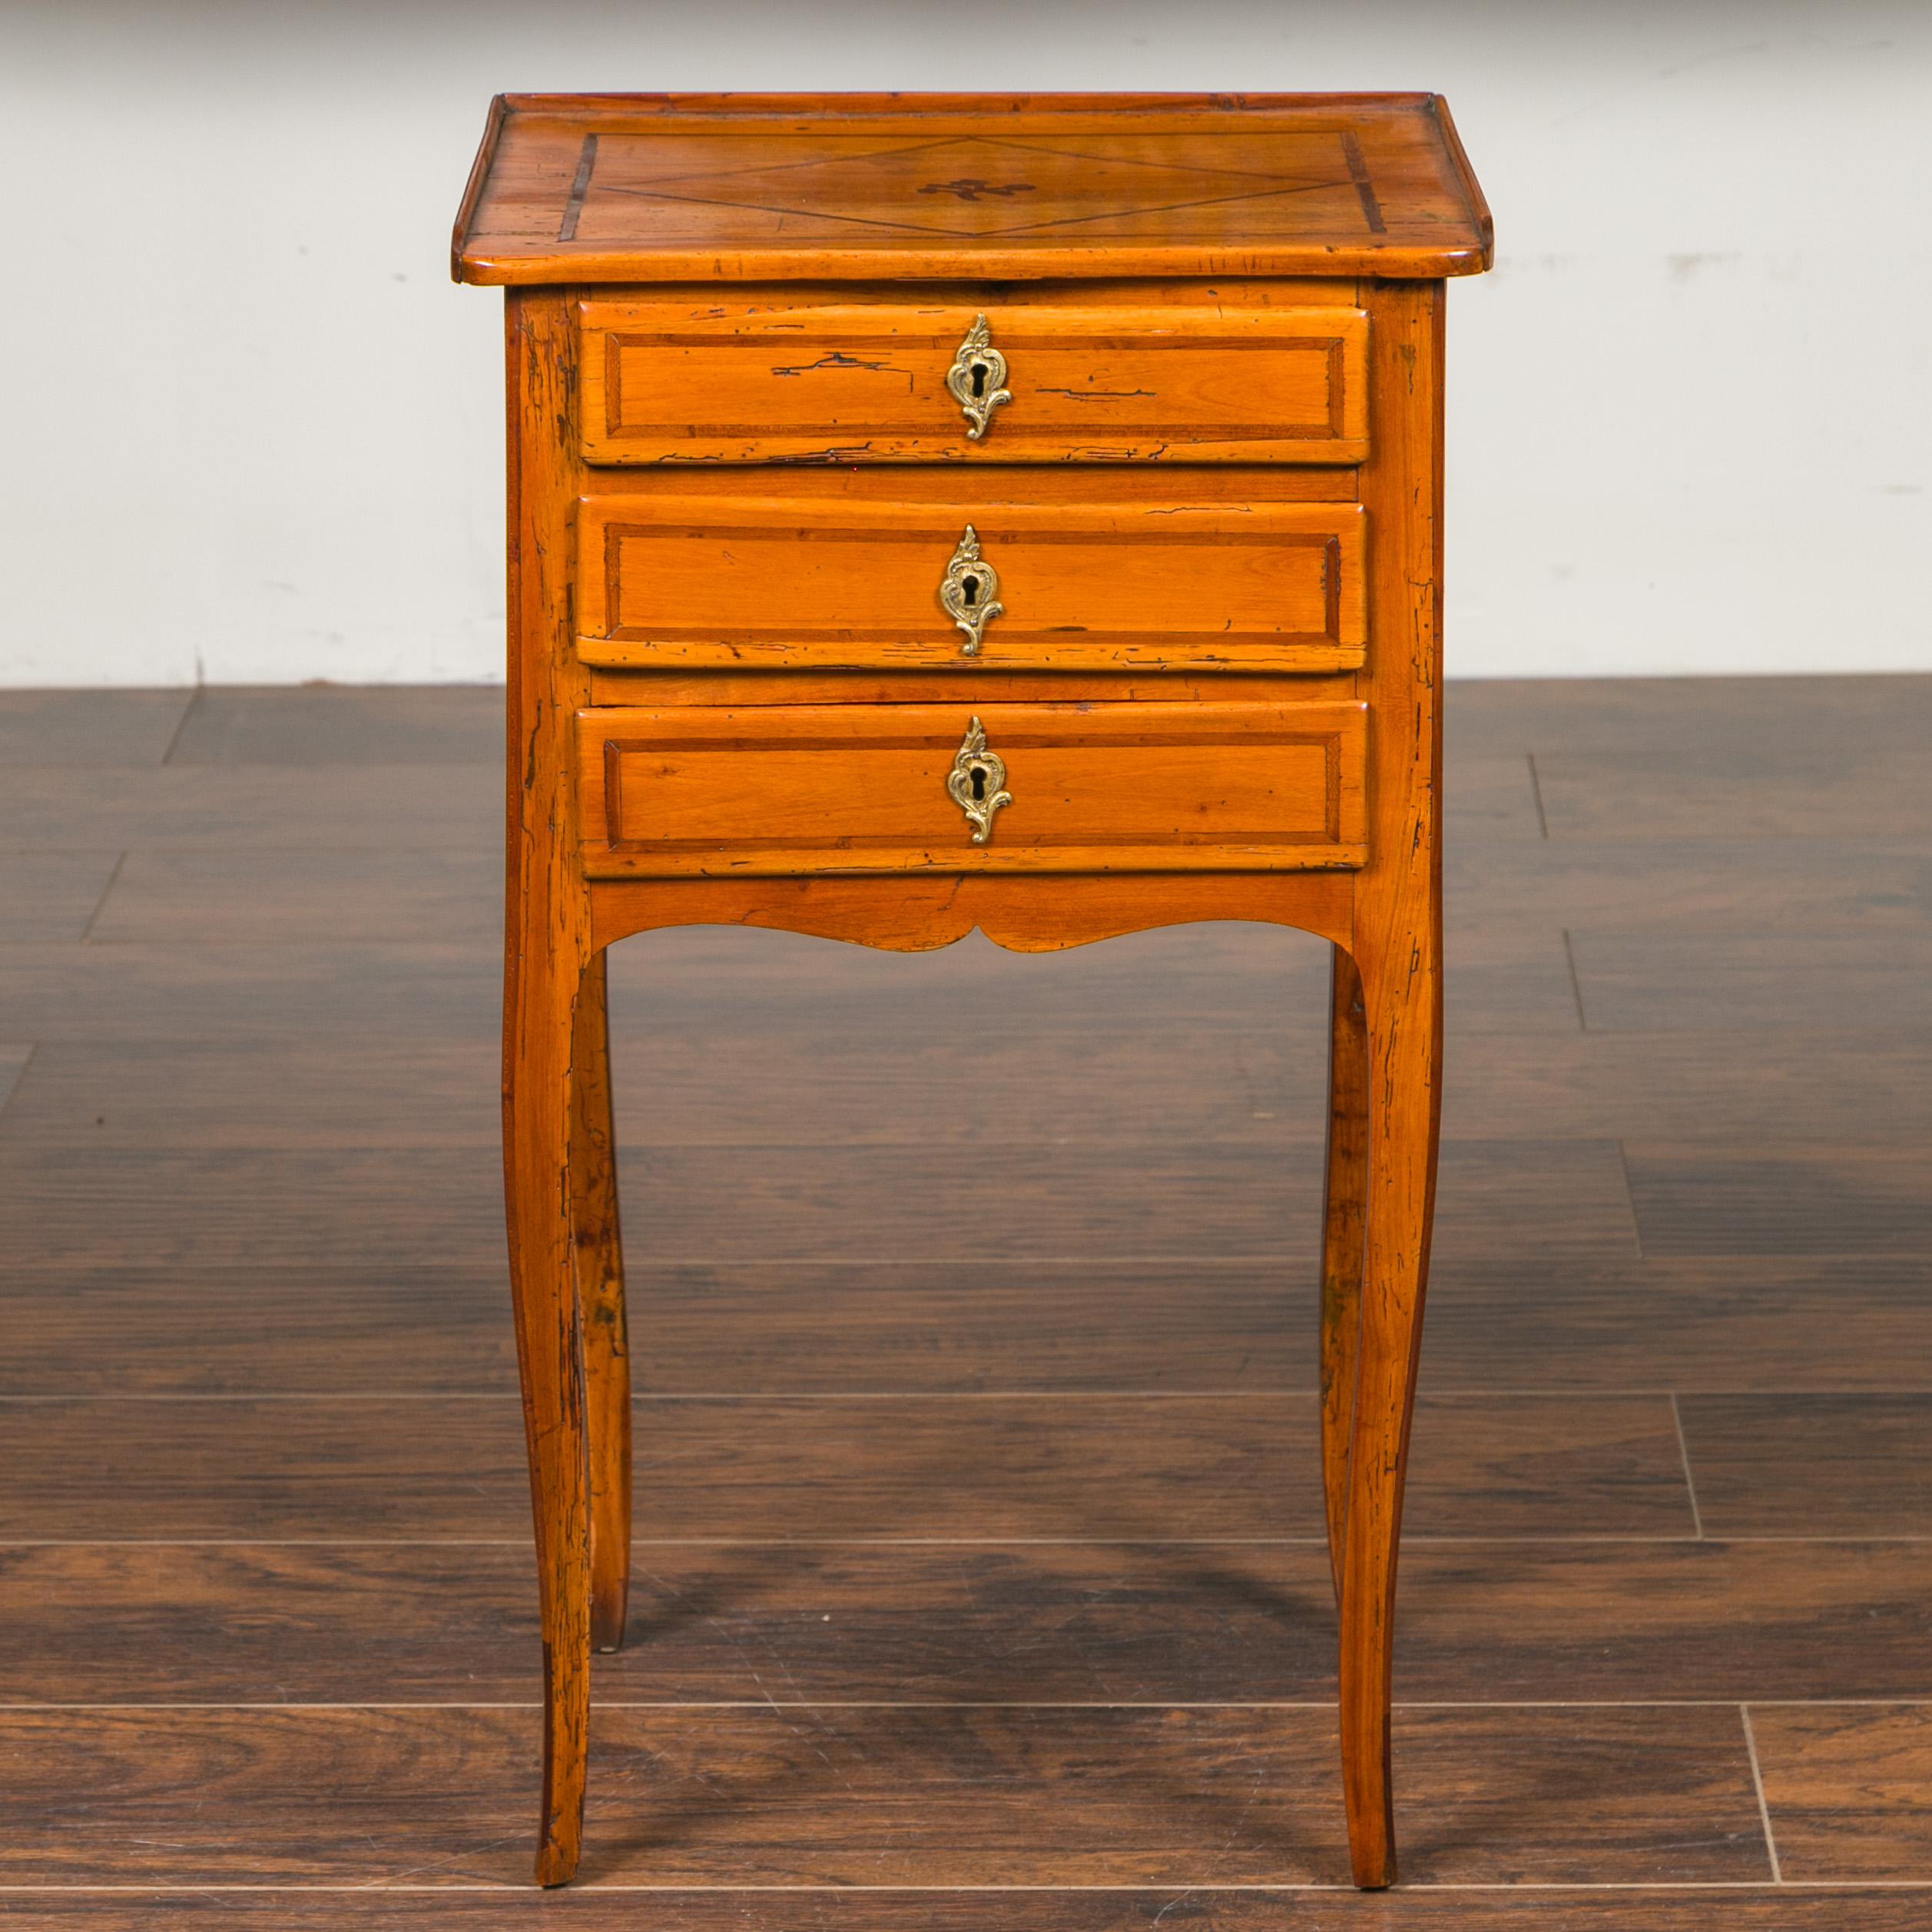 A French Louis-Philippe period walnut bedside table from the mid-19th century, with three drawers, banding and diamond motifs. Born in France during the reign of King Louis-Philippe, this walnut side table features a rectangular top with